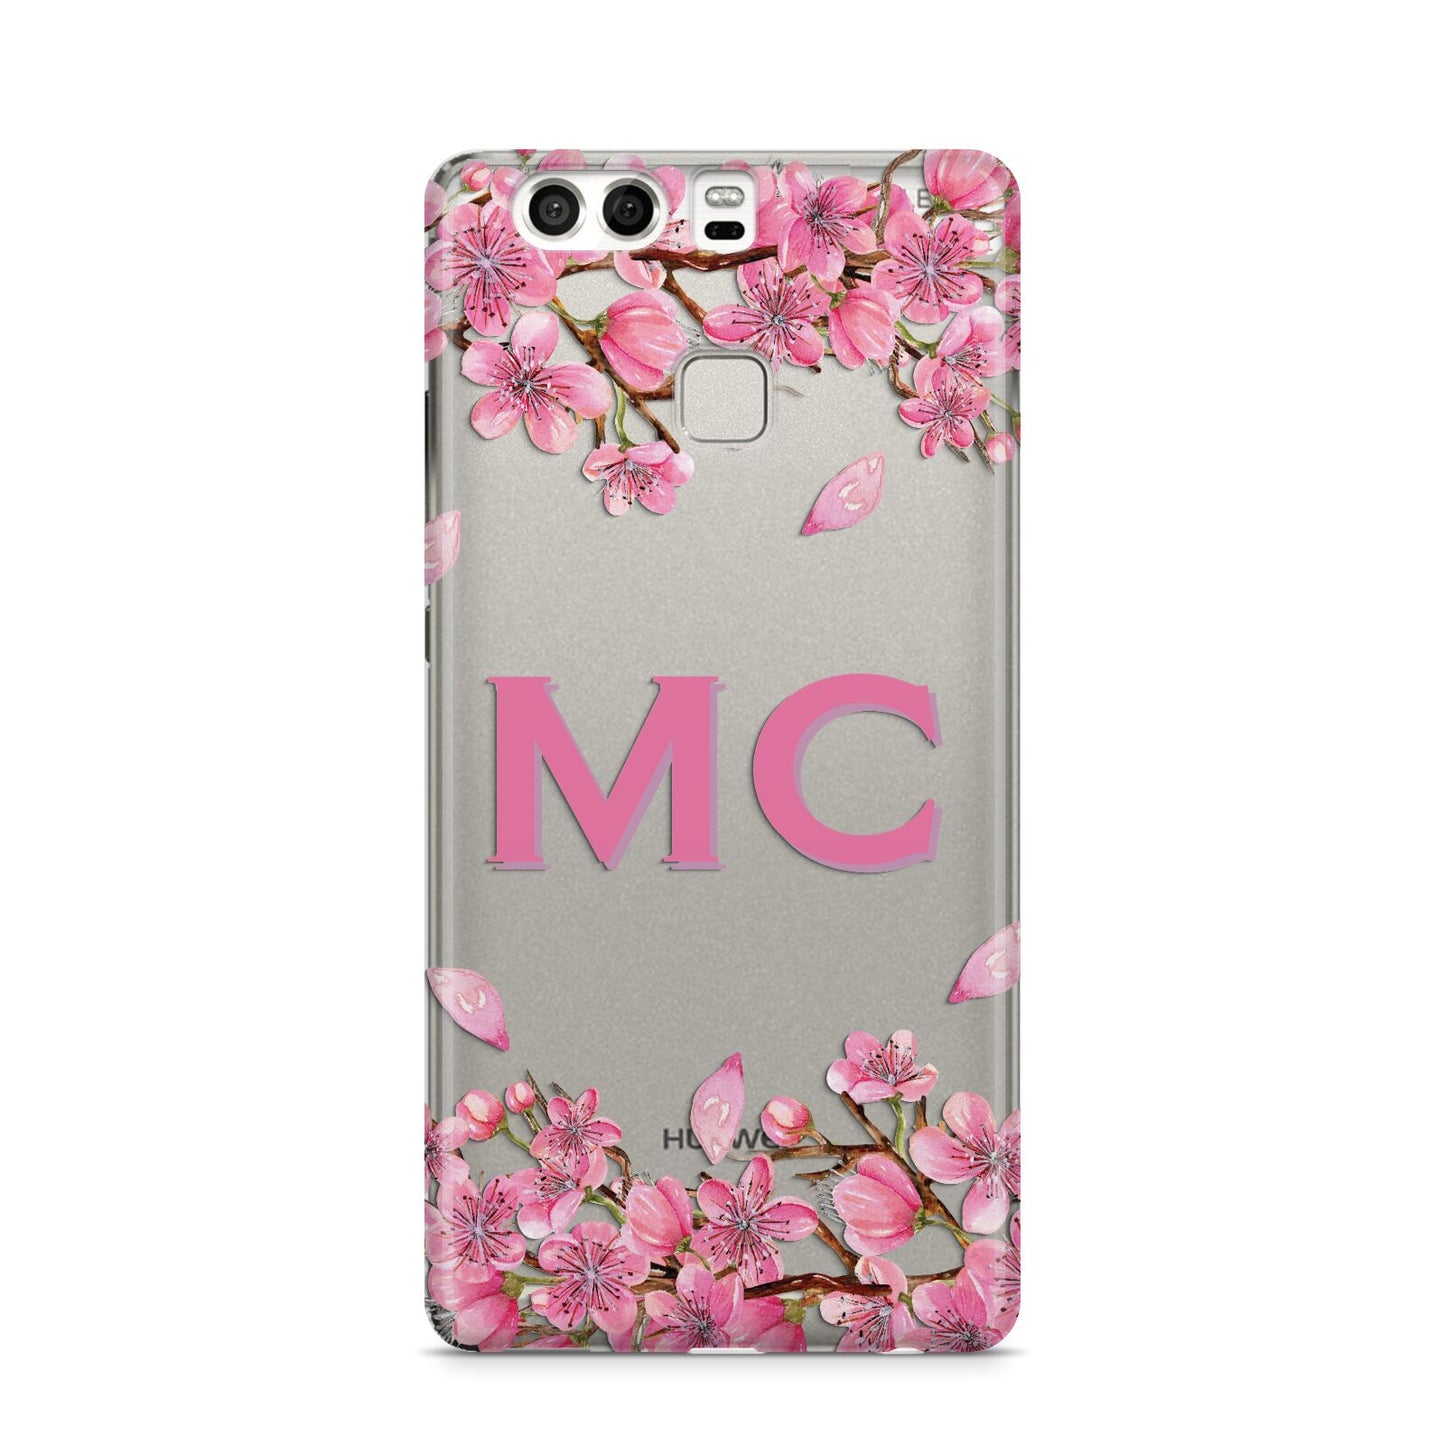 Personalised Vibrant Cherry Blossom Pink Huawei P9 Case